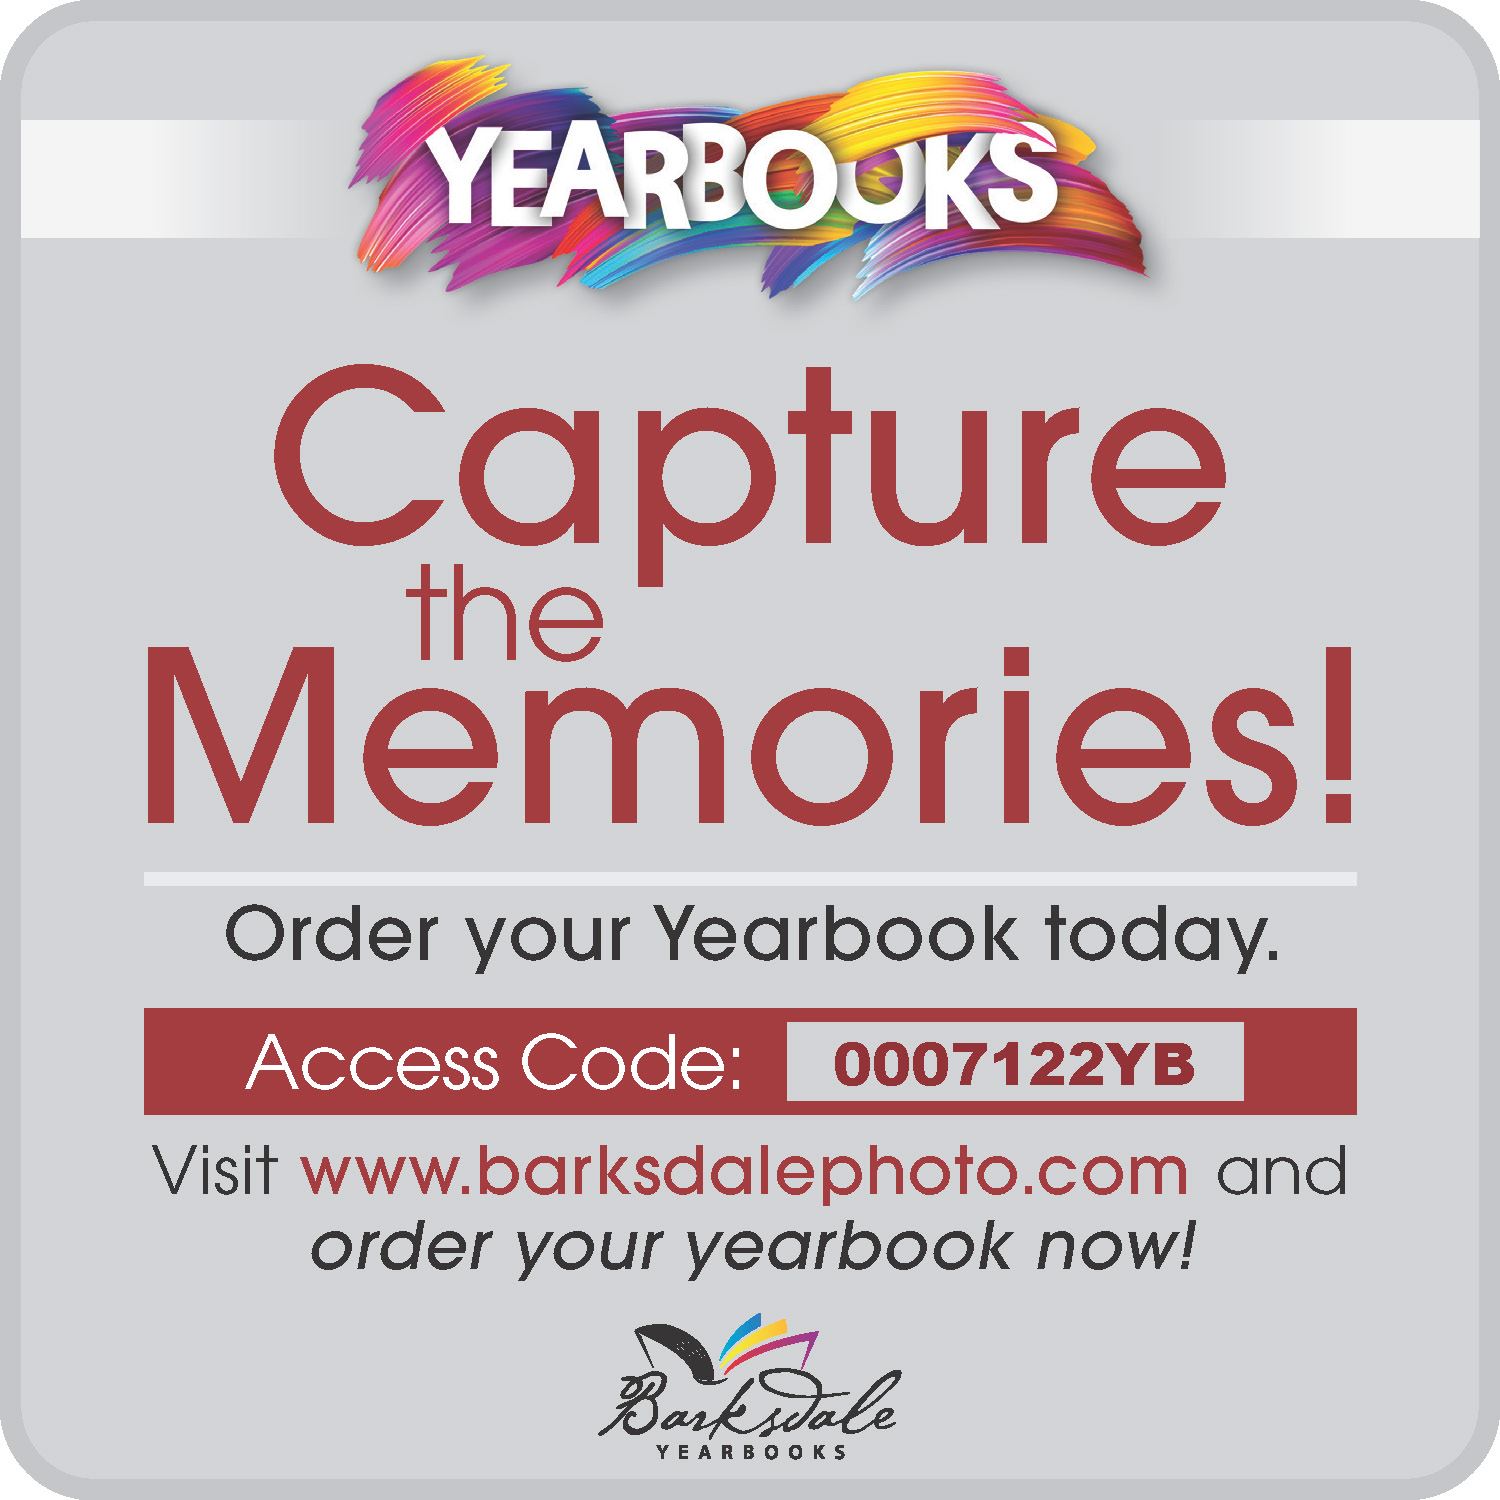  Order your yearbook!